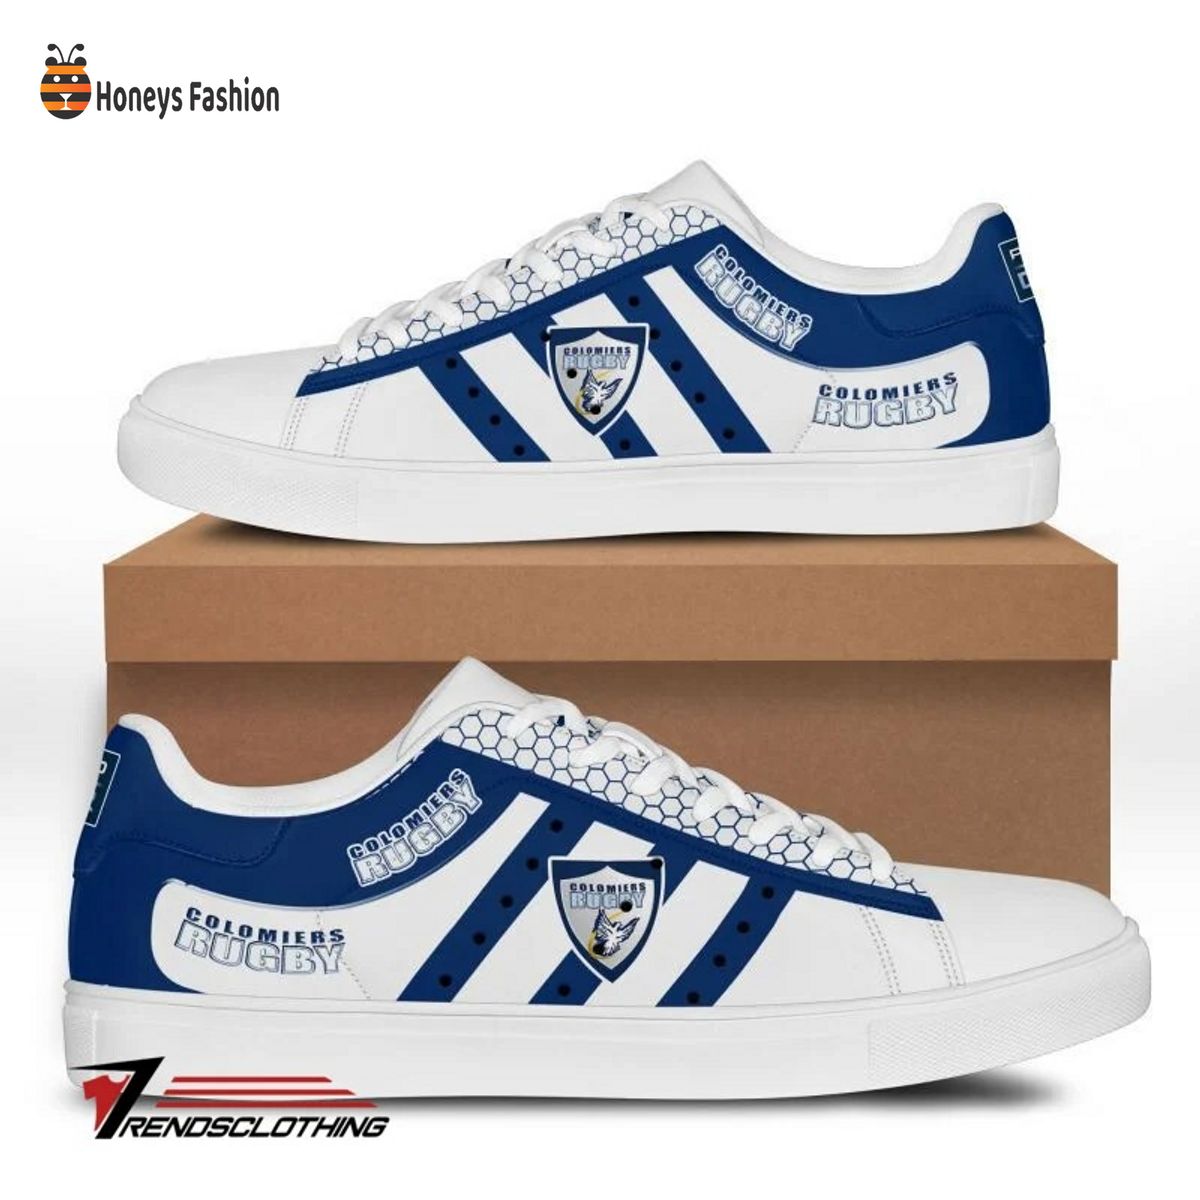 Colomiers Rugby 2023 stan smith skate shoes